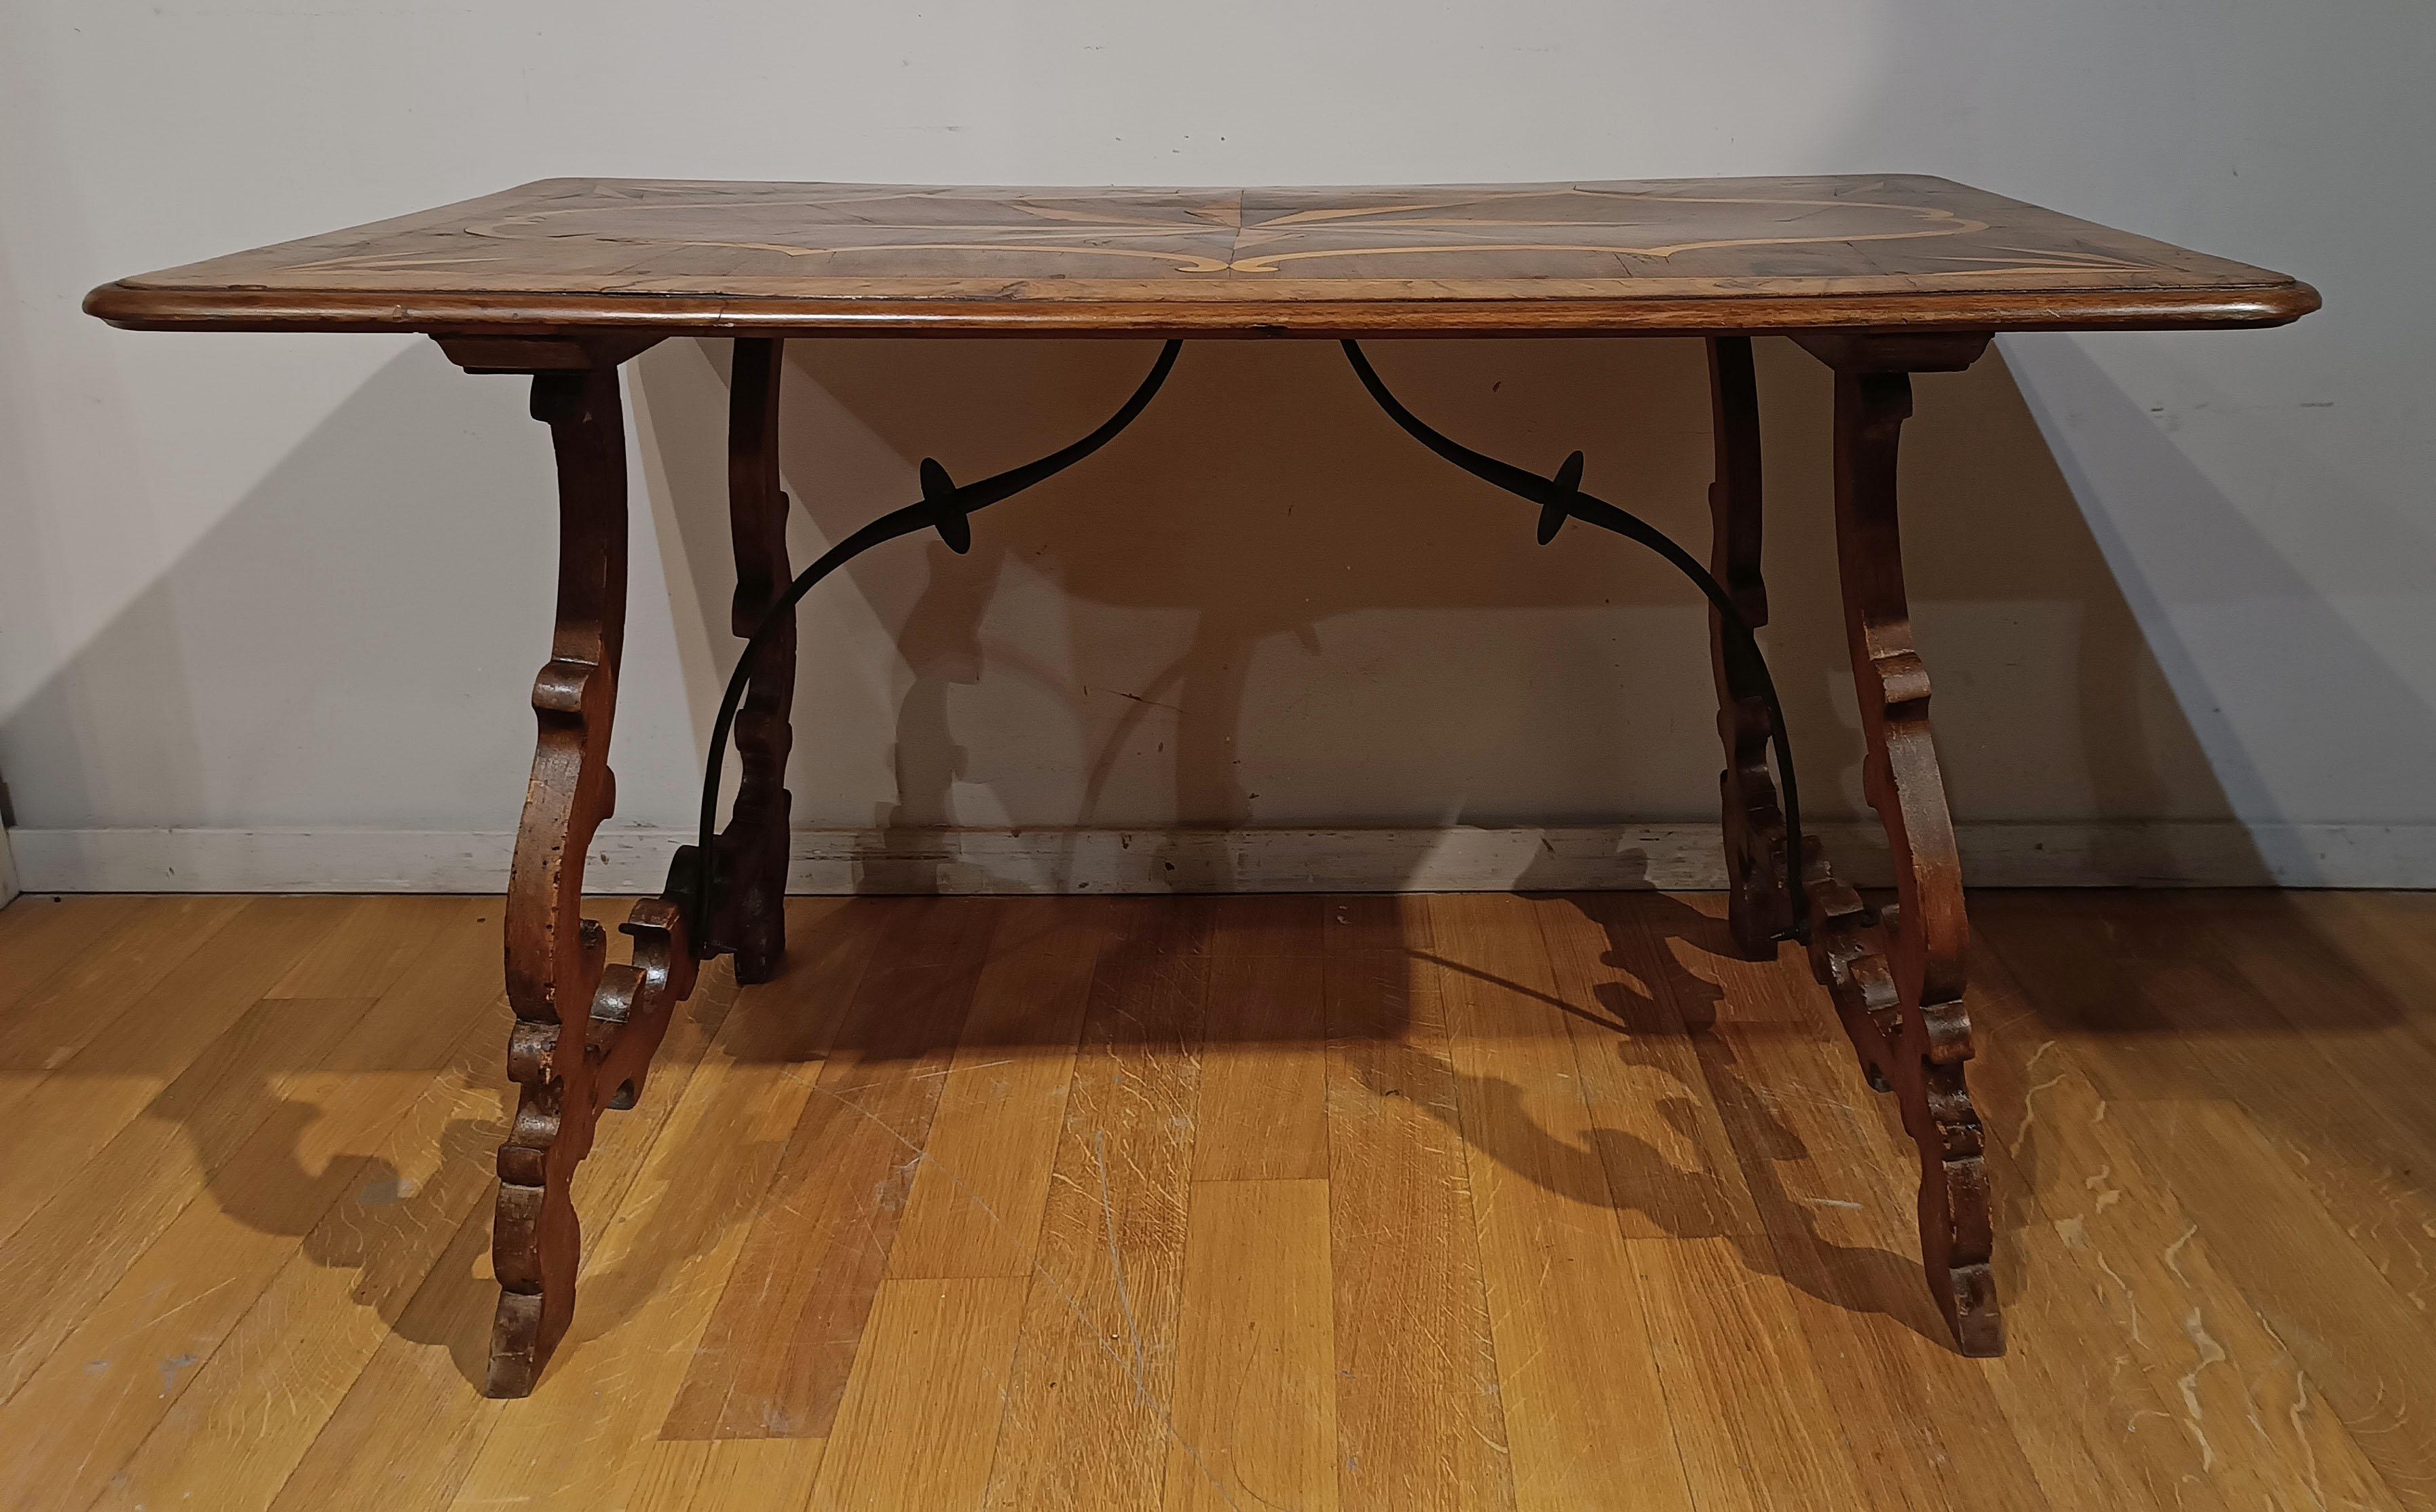 Italian EARLY 18th CENTURY INLAID TABLE WITH LYRE LEGS For Sale